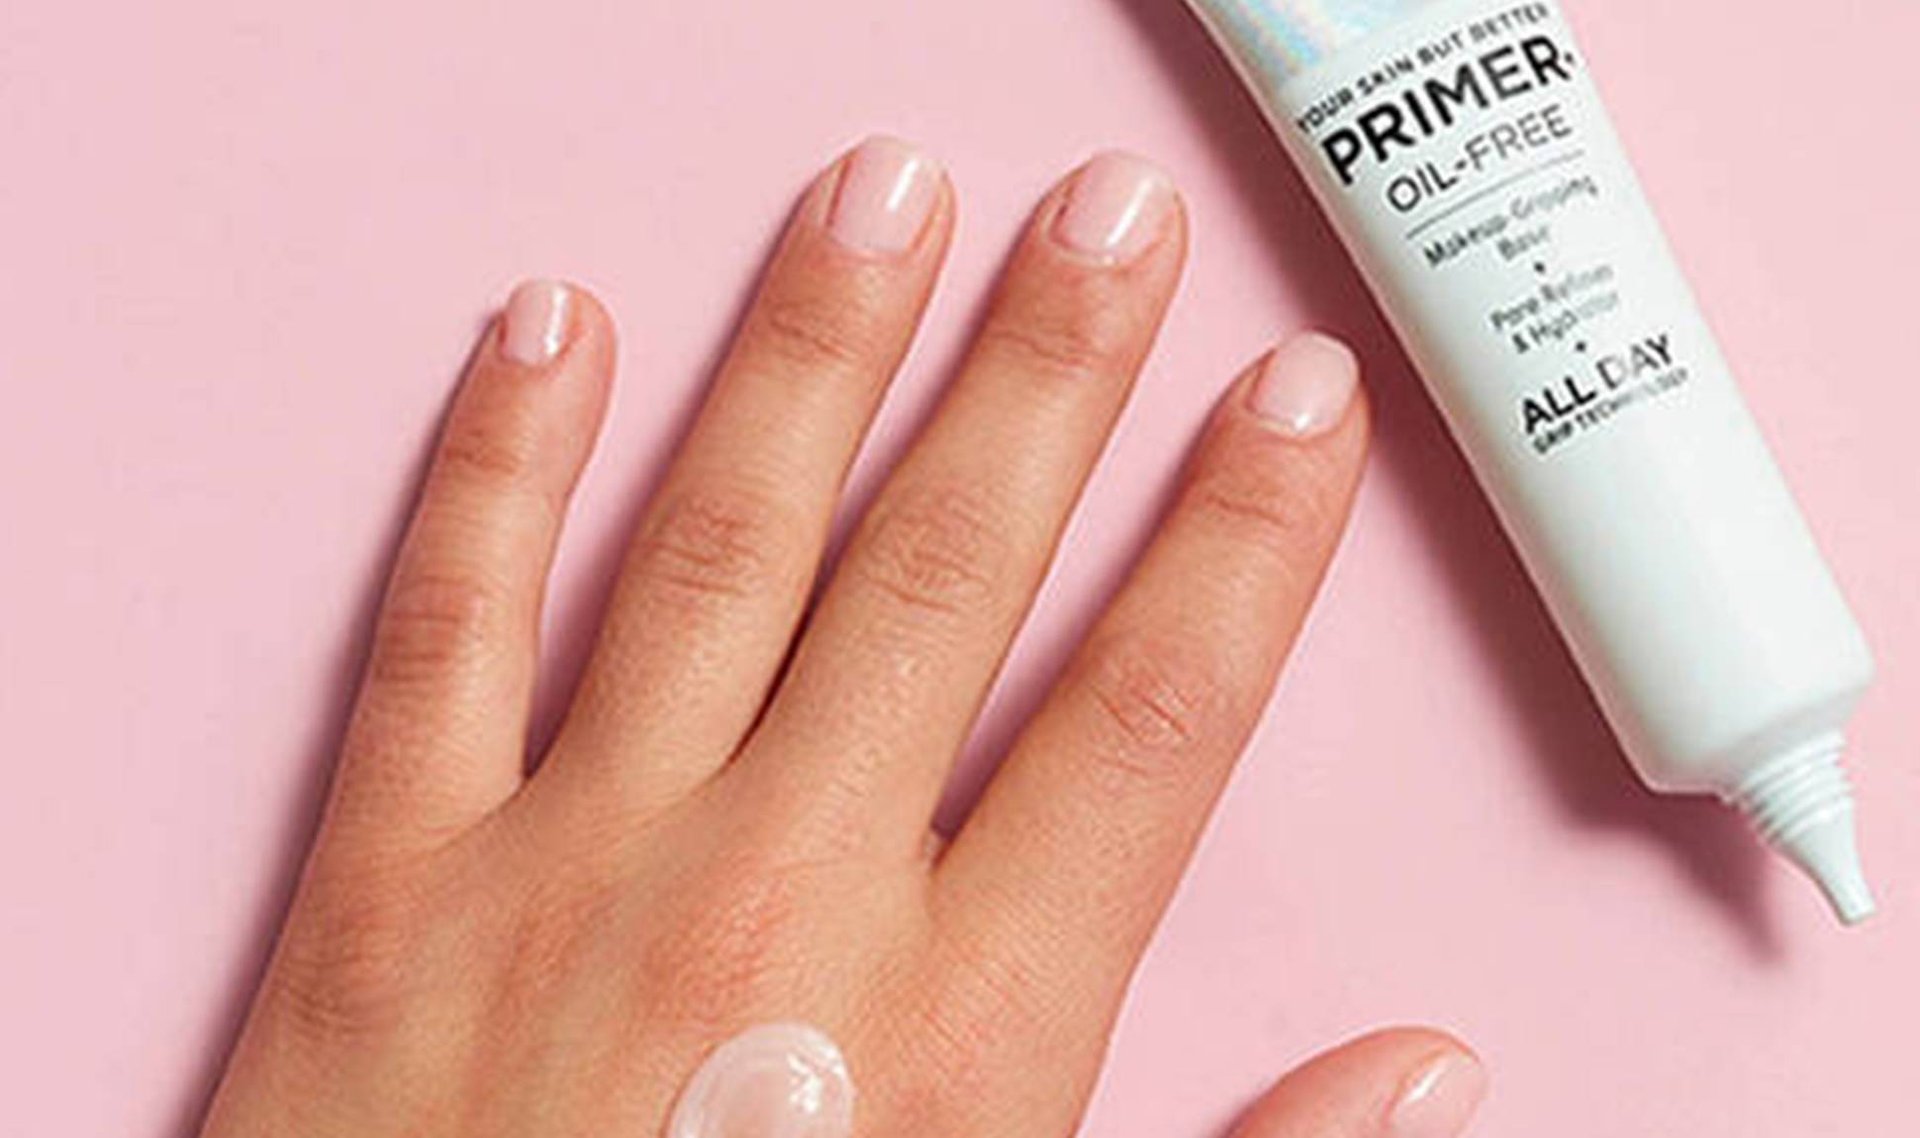 IT Cosmetics Just Launched a New Primer and It’s the Perfect Combination of Skin-Care Meets Makeup